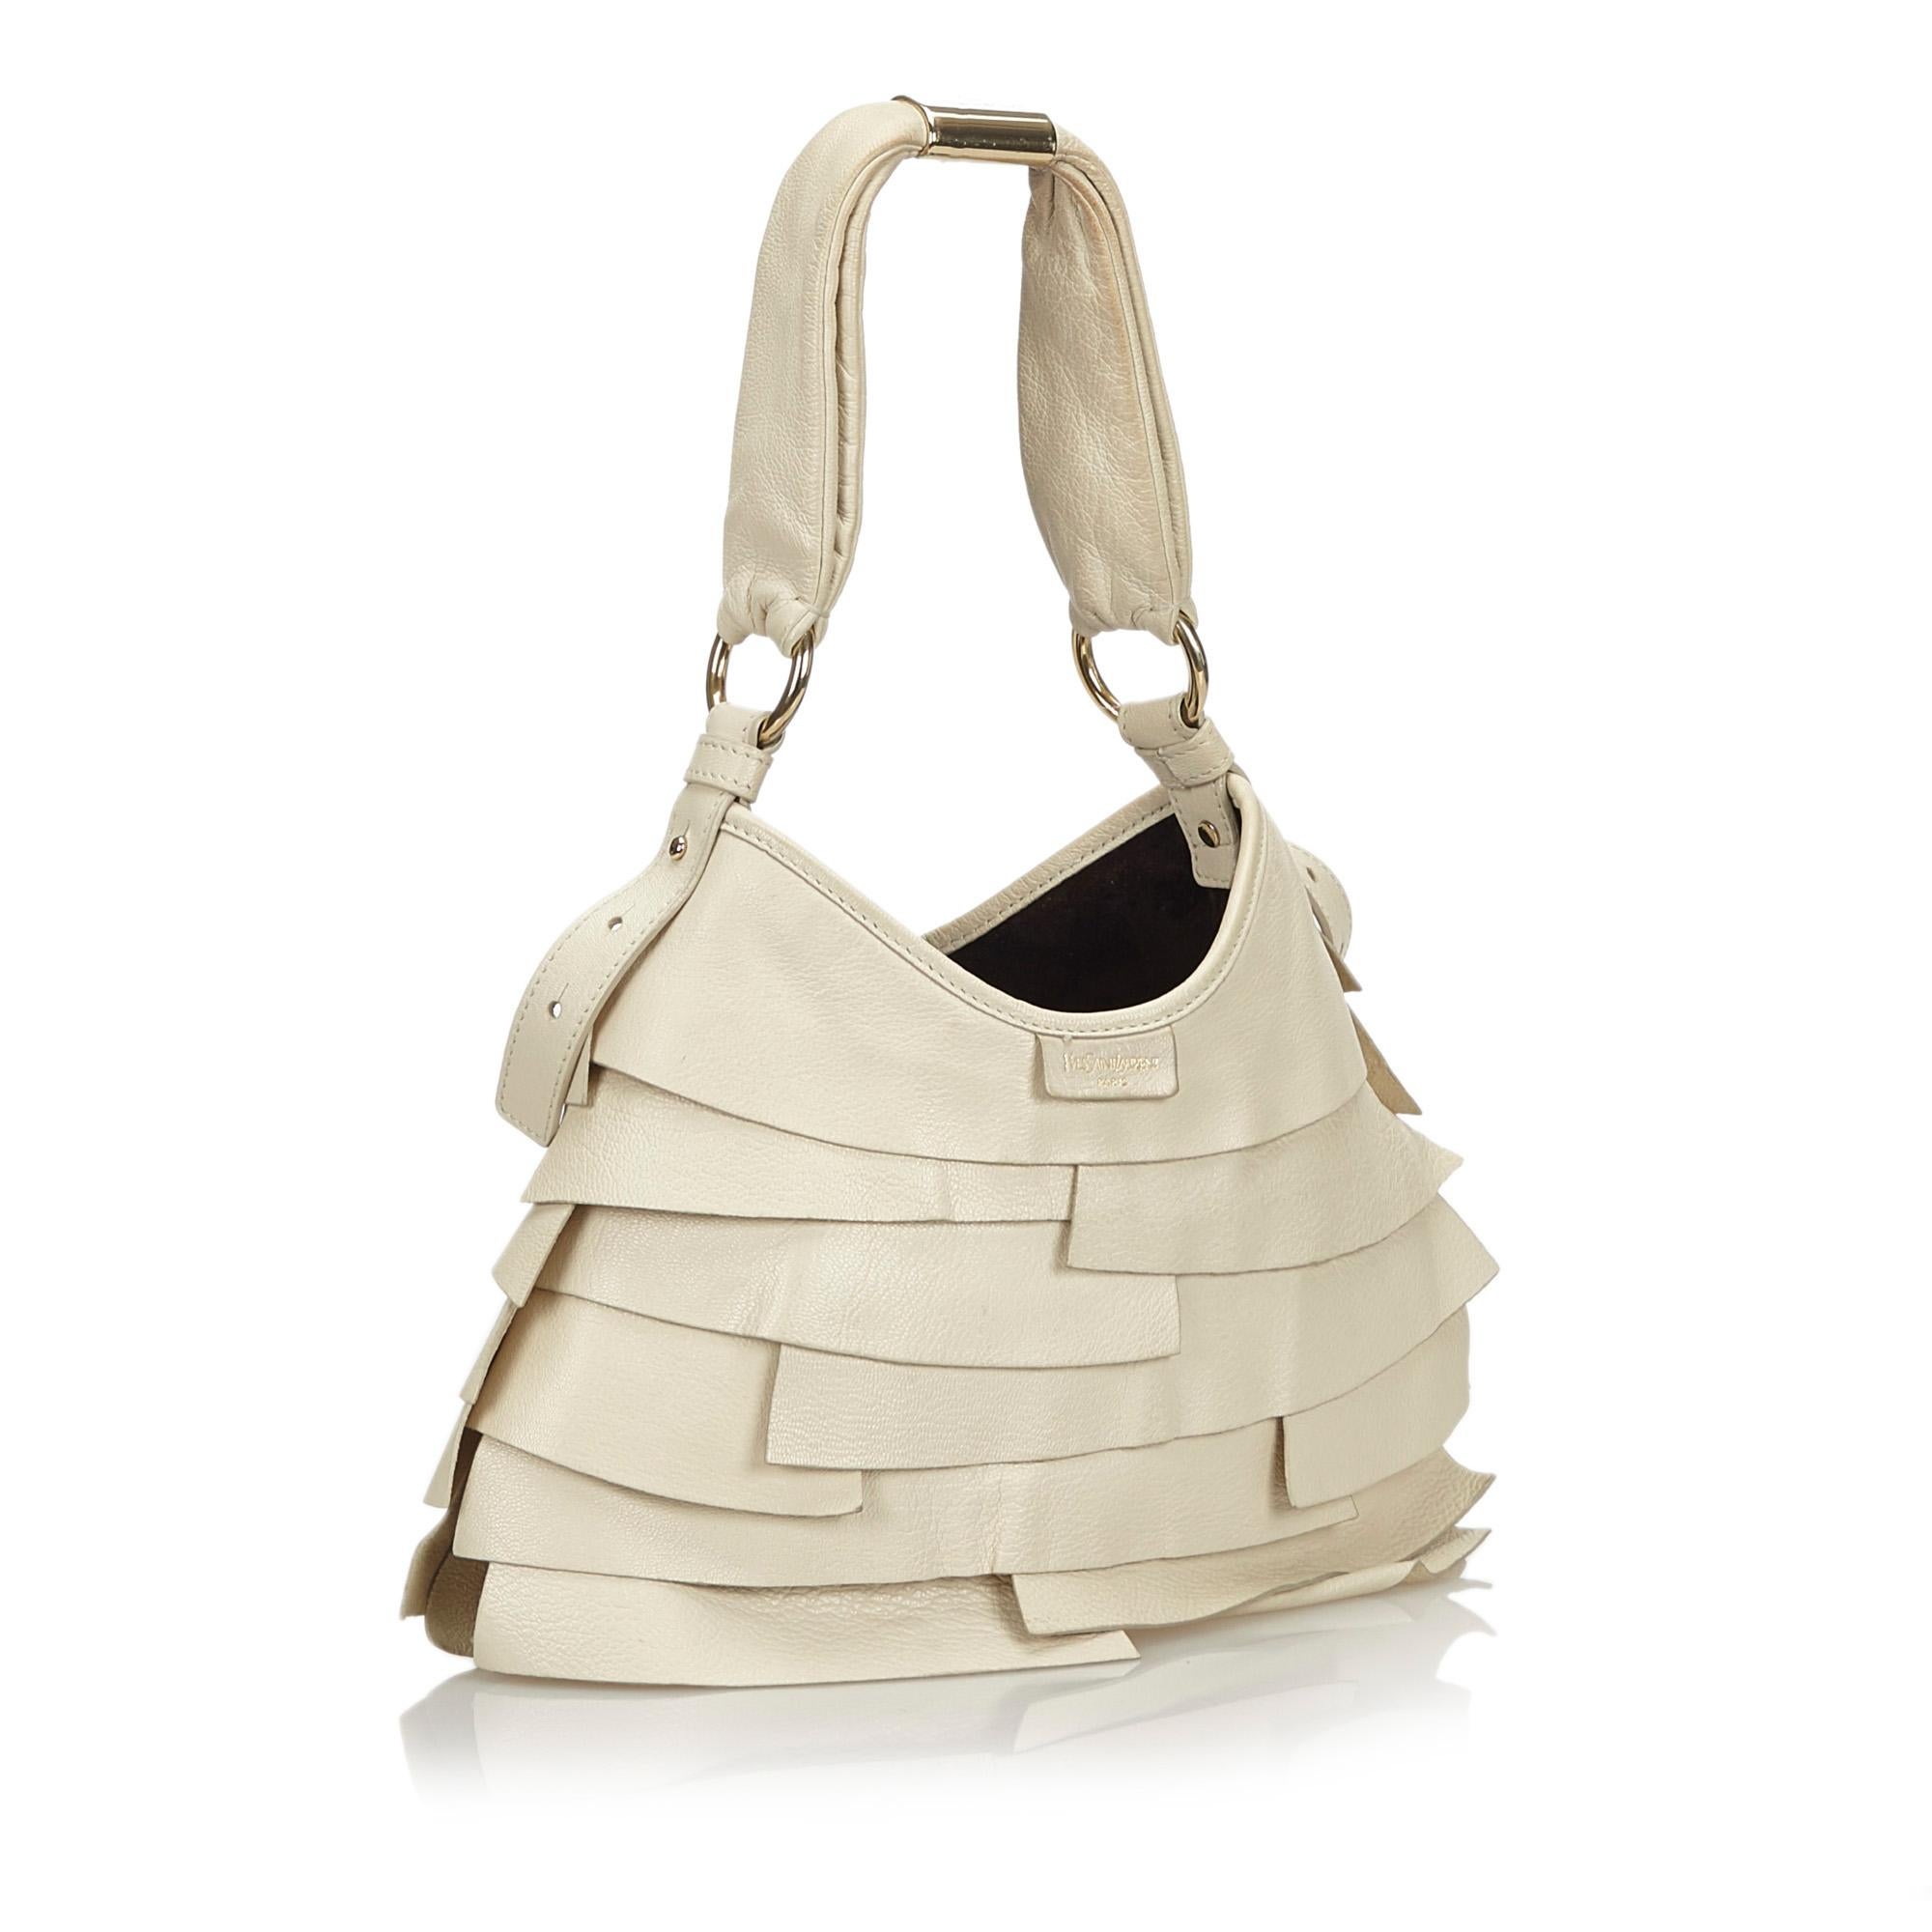 The Saint Tropez features a ruffled leather body, a flat leather strap, a top magnetic closure, and interior zip and slip pockets. It carries as B+ condition rating.

Inclusions: 
Dust Bag

Dimensions:
Length: 22.00 cm
Width: 30.00 cm
Depth: 2.00